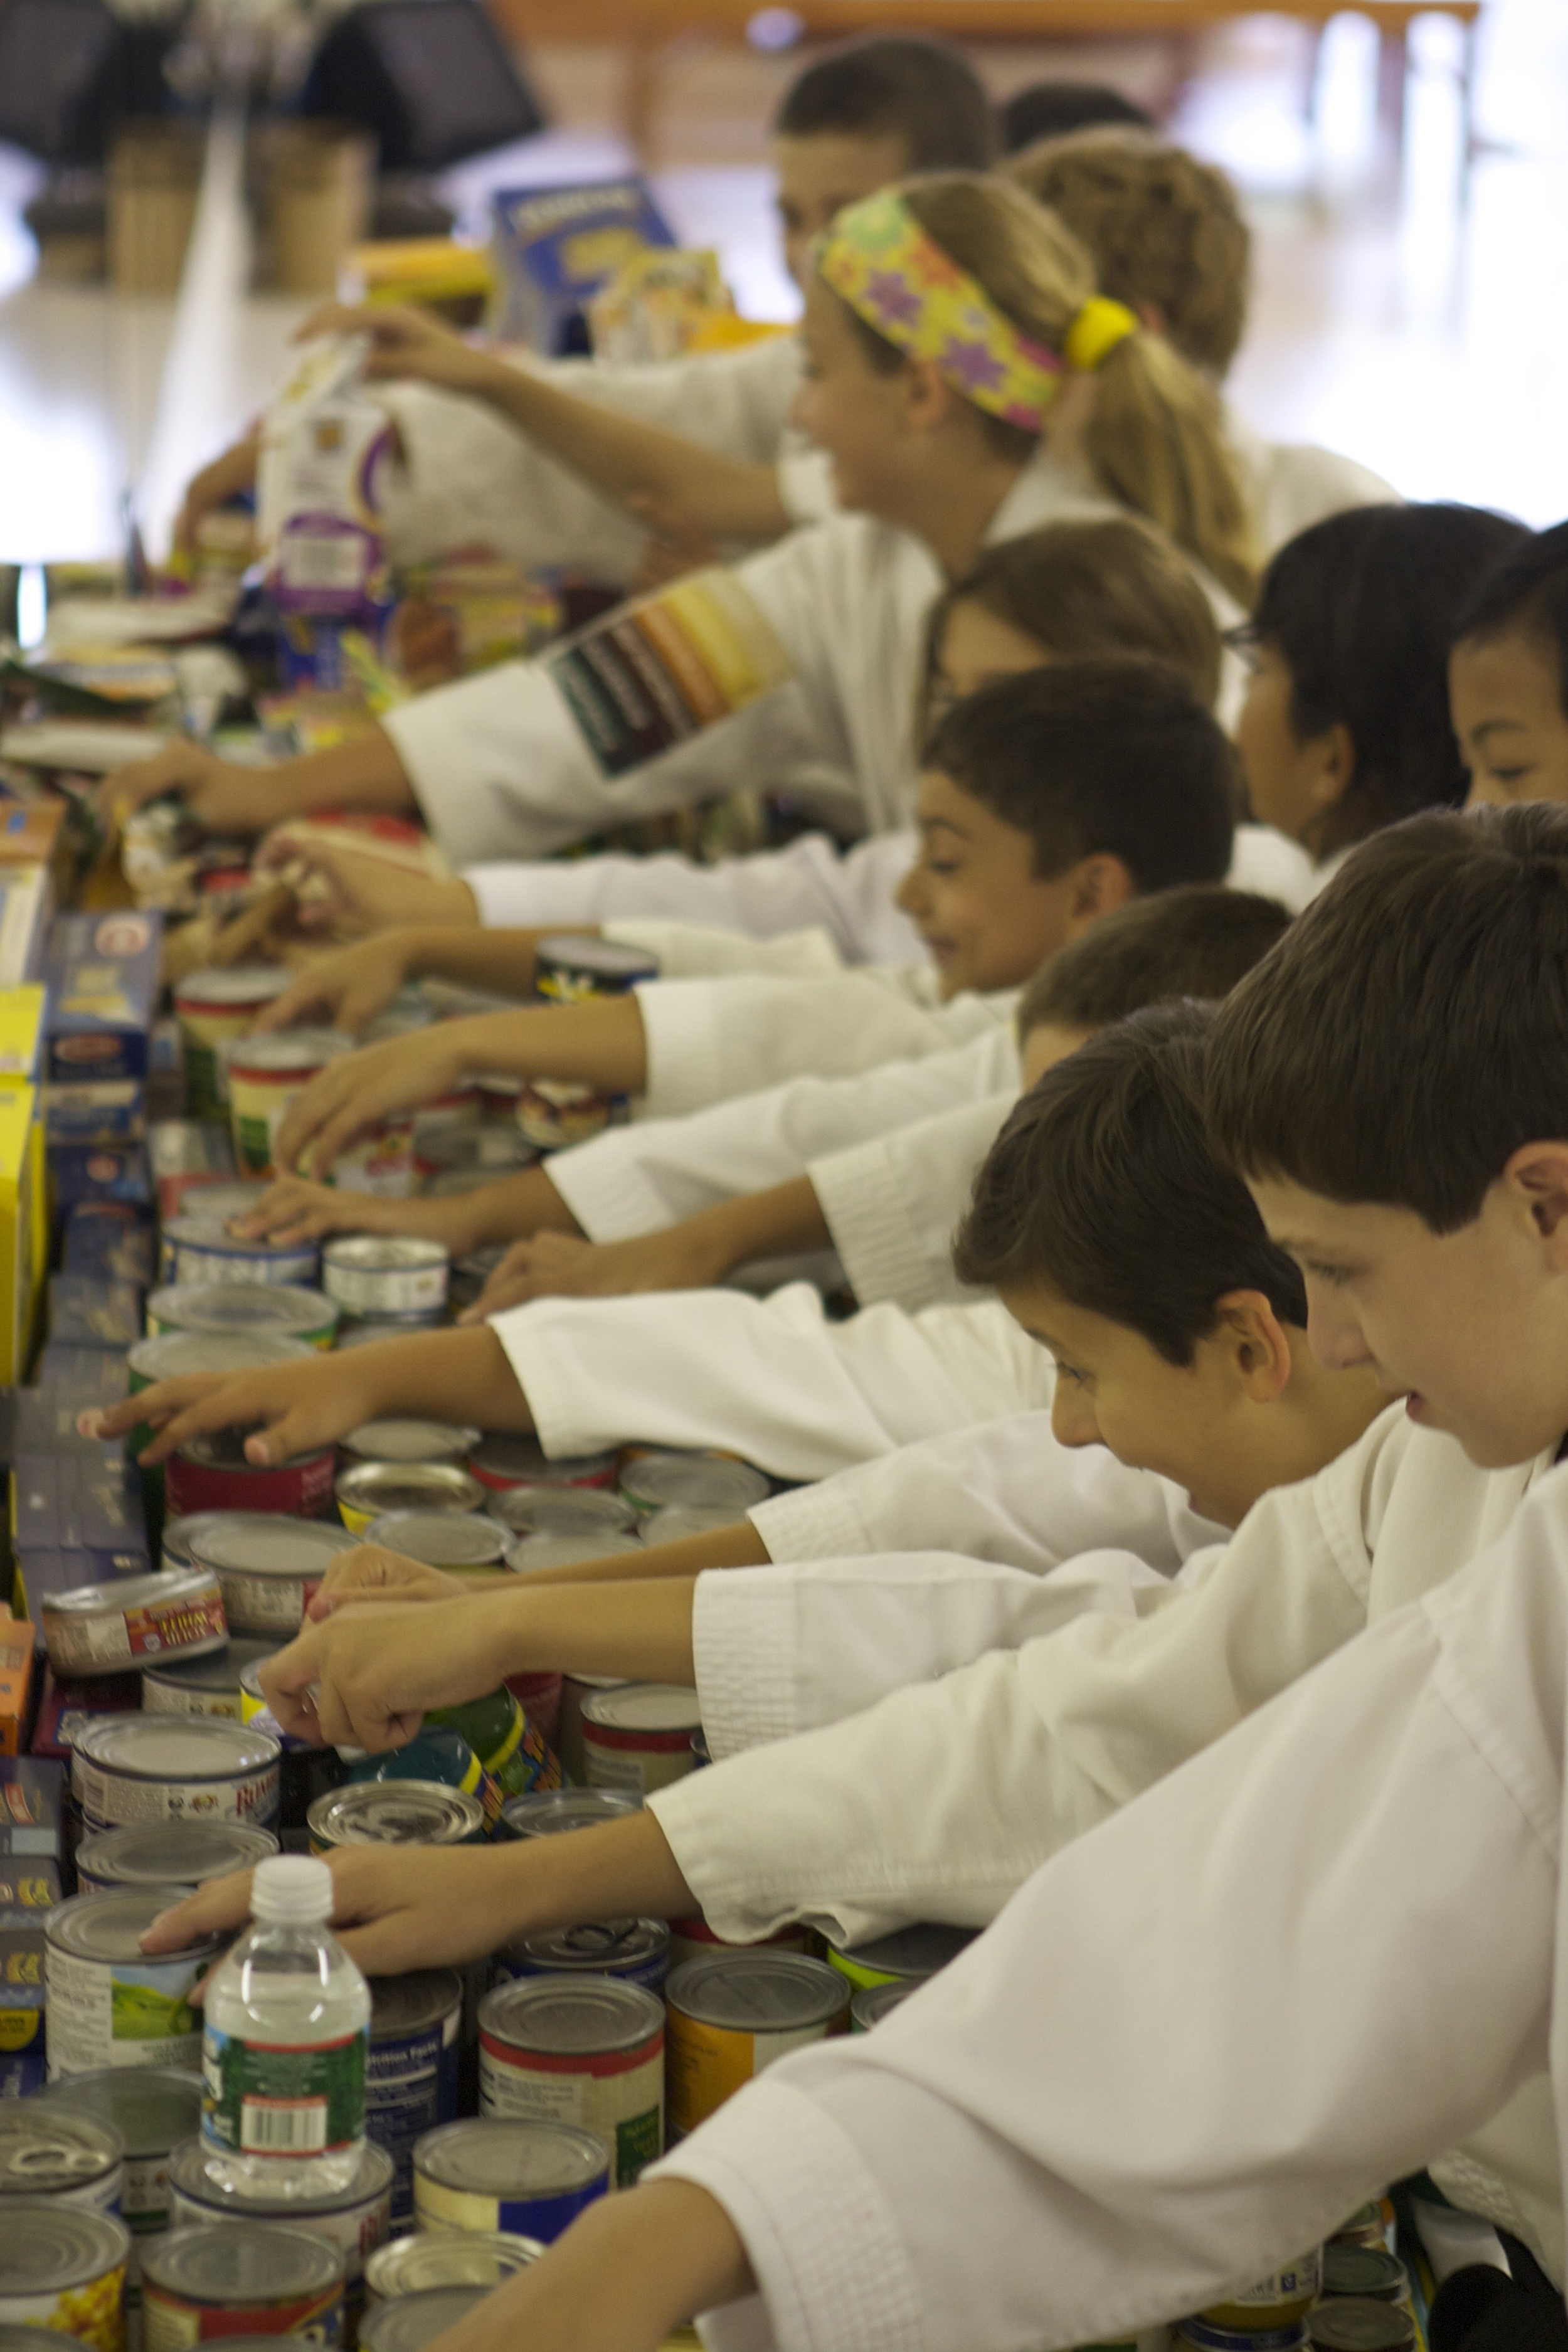 thedojo-food-drive-martial-arts-karate-kids-doing-community-service-in-rutherford-nj_14691000973_o.jpg